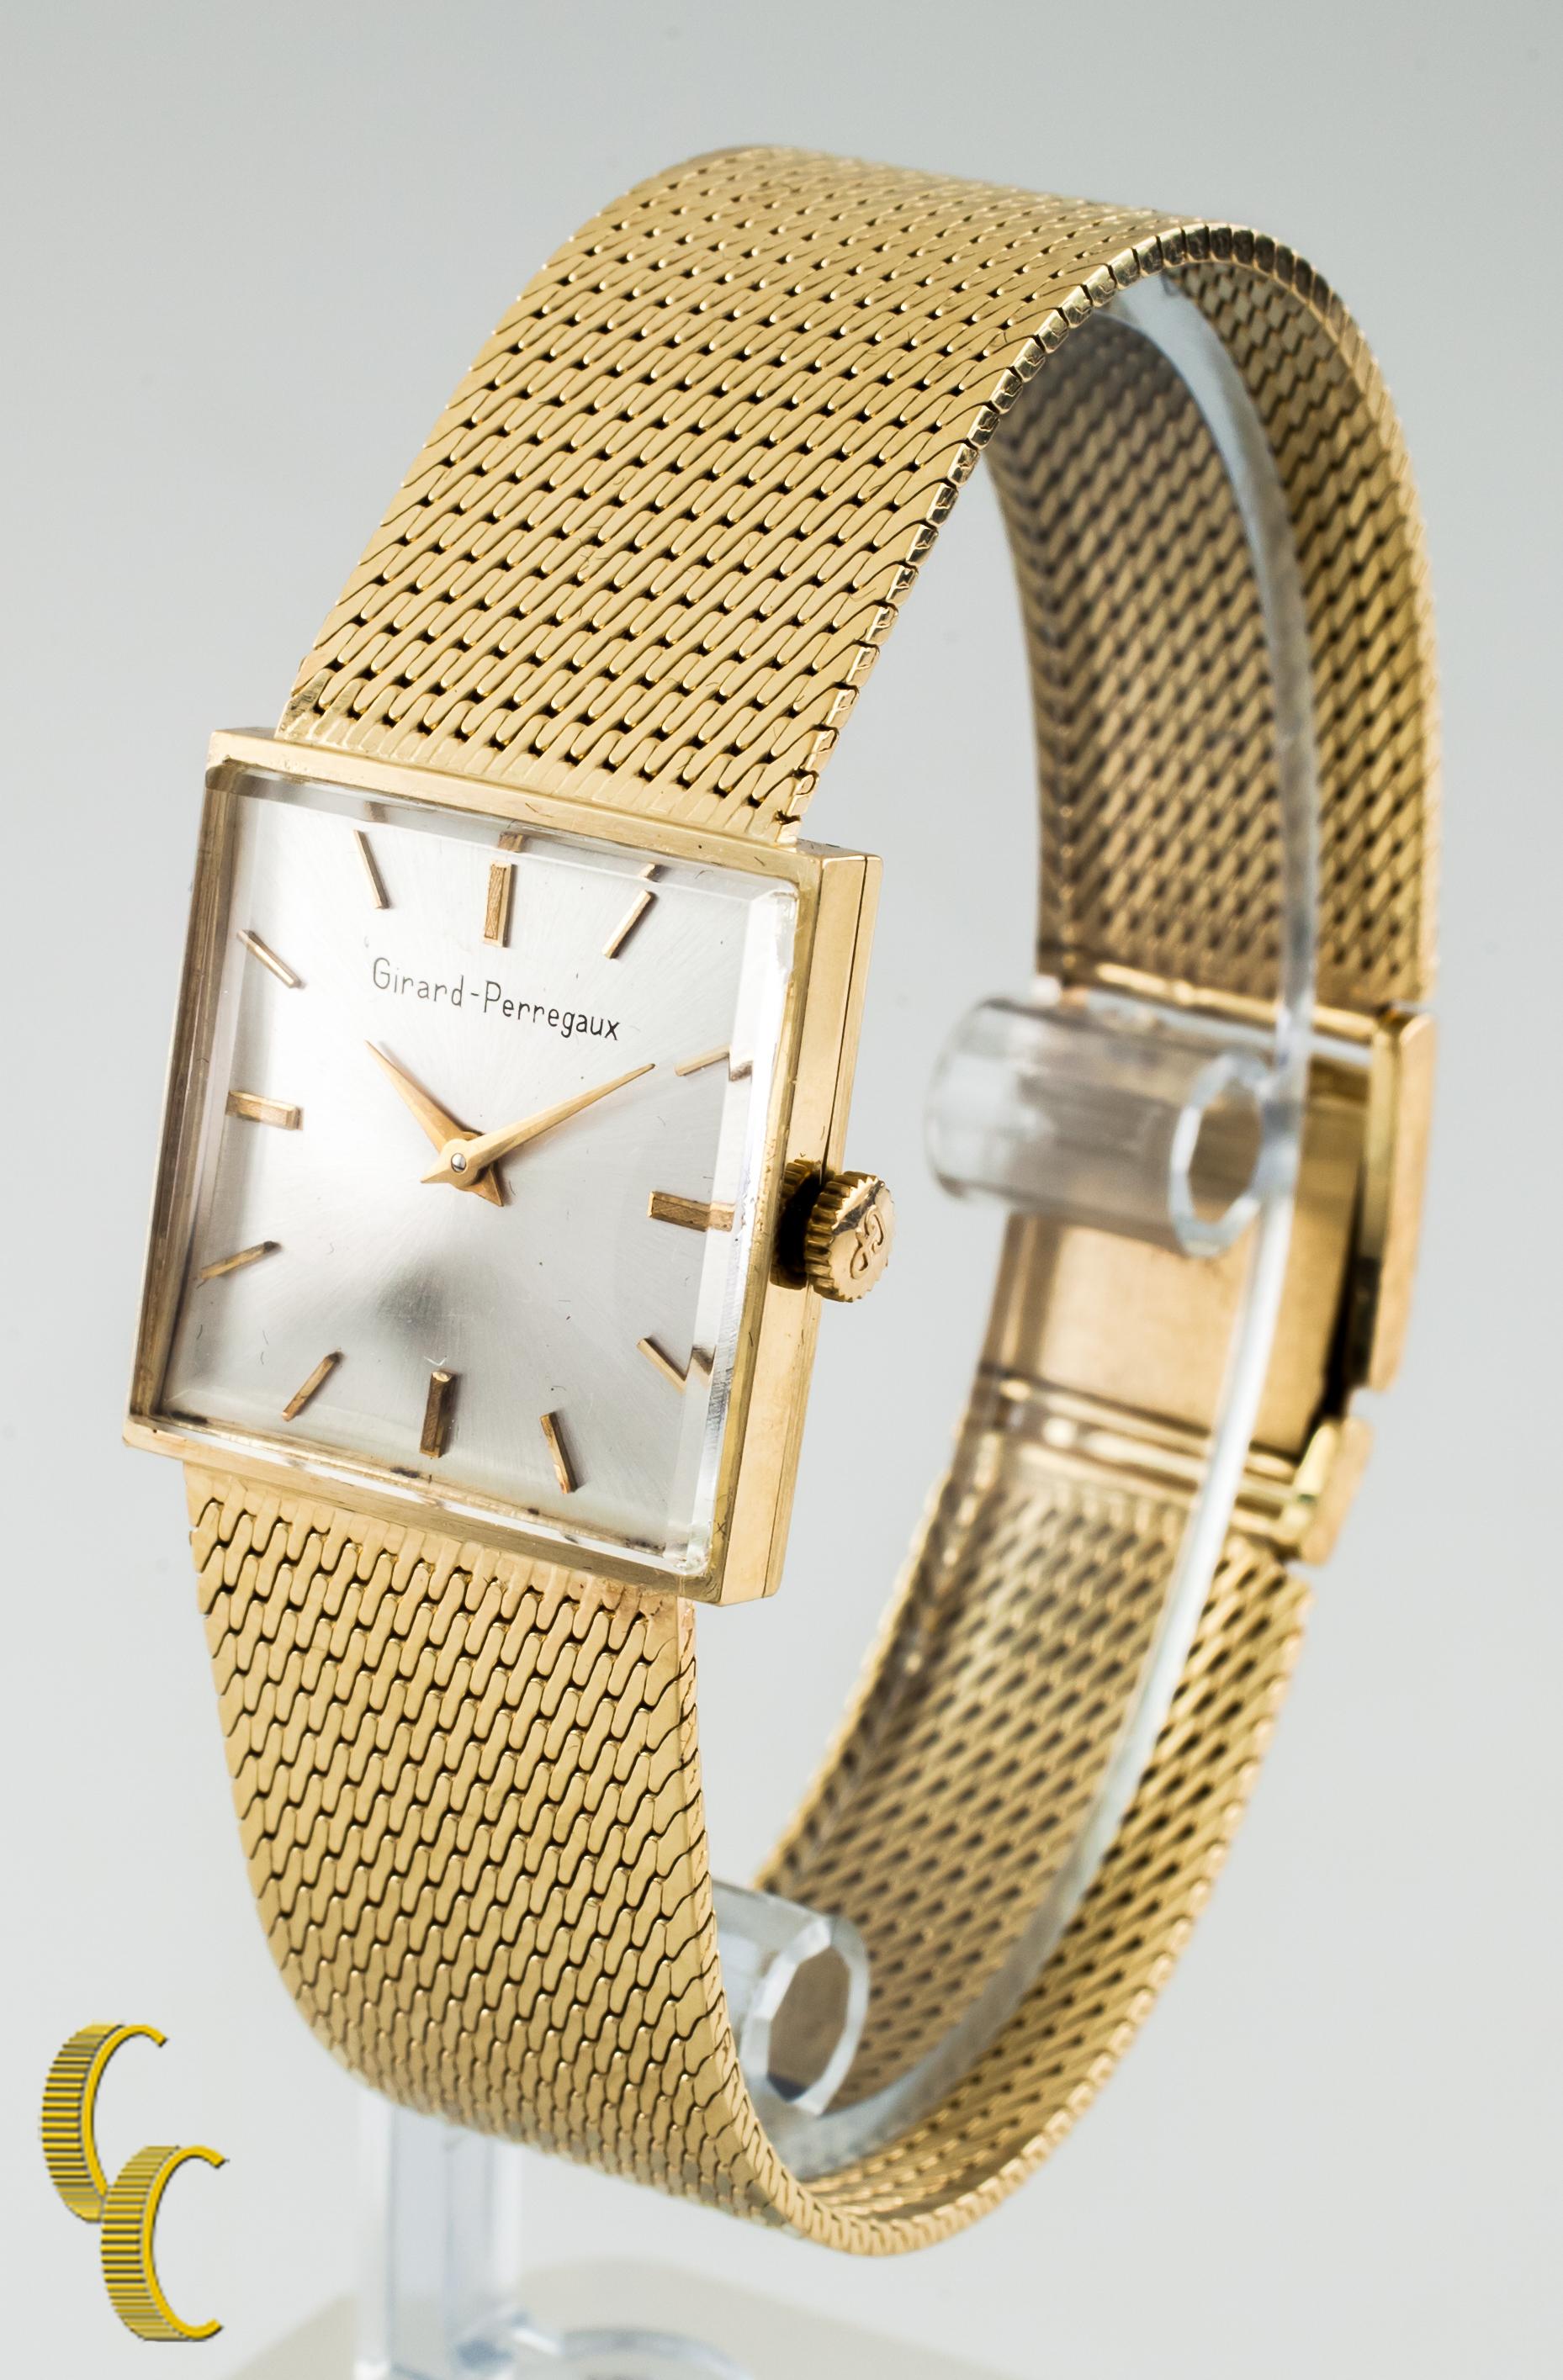 14k Yellow Gold Girard-Perregaux Vintage Hand-Winding Watch w/ Gold Mesh Band

Case #GPB2064-636280

Square 14k Yellow Gold Case
22 mm Wide (24 mm w/ Crown)
22 mm Long

Lug-to-Lug Distance = 22 mm
Lug-to-Lug Width = 18 mm
Thickness = 6 mm

Champagne